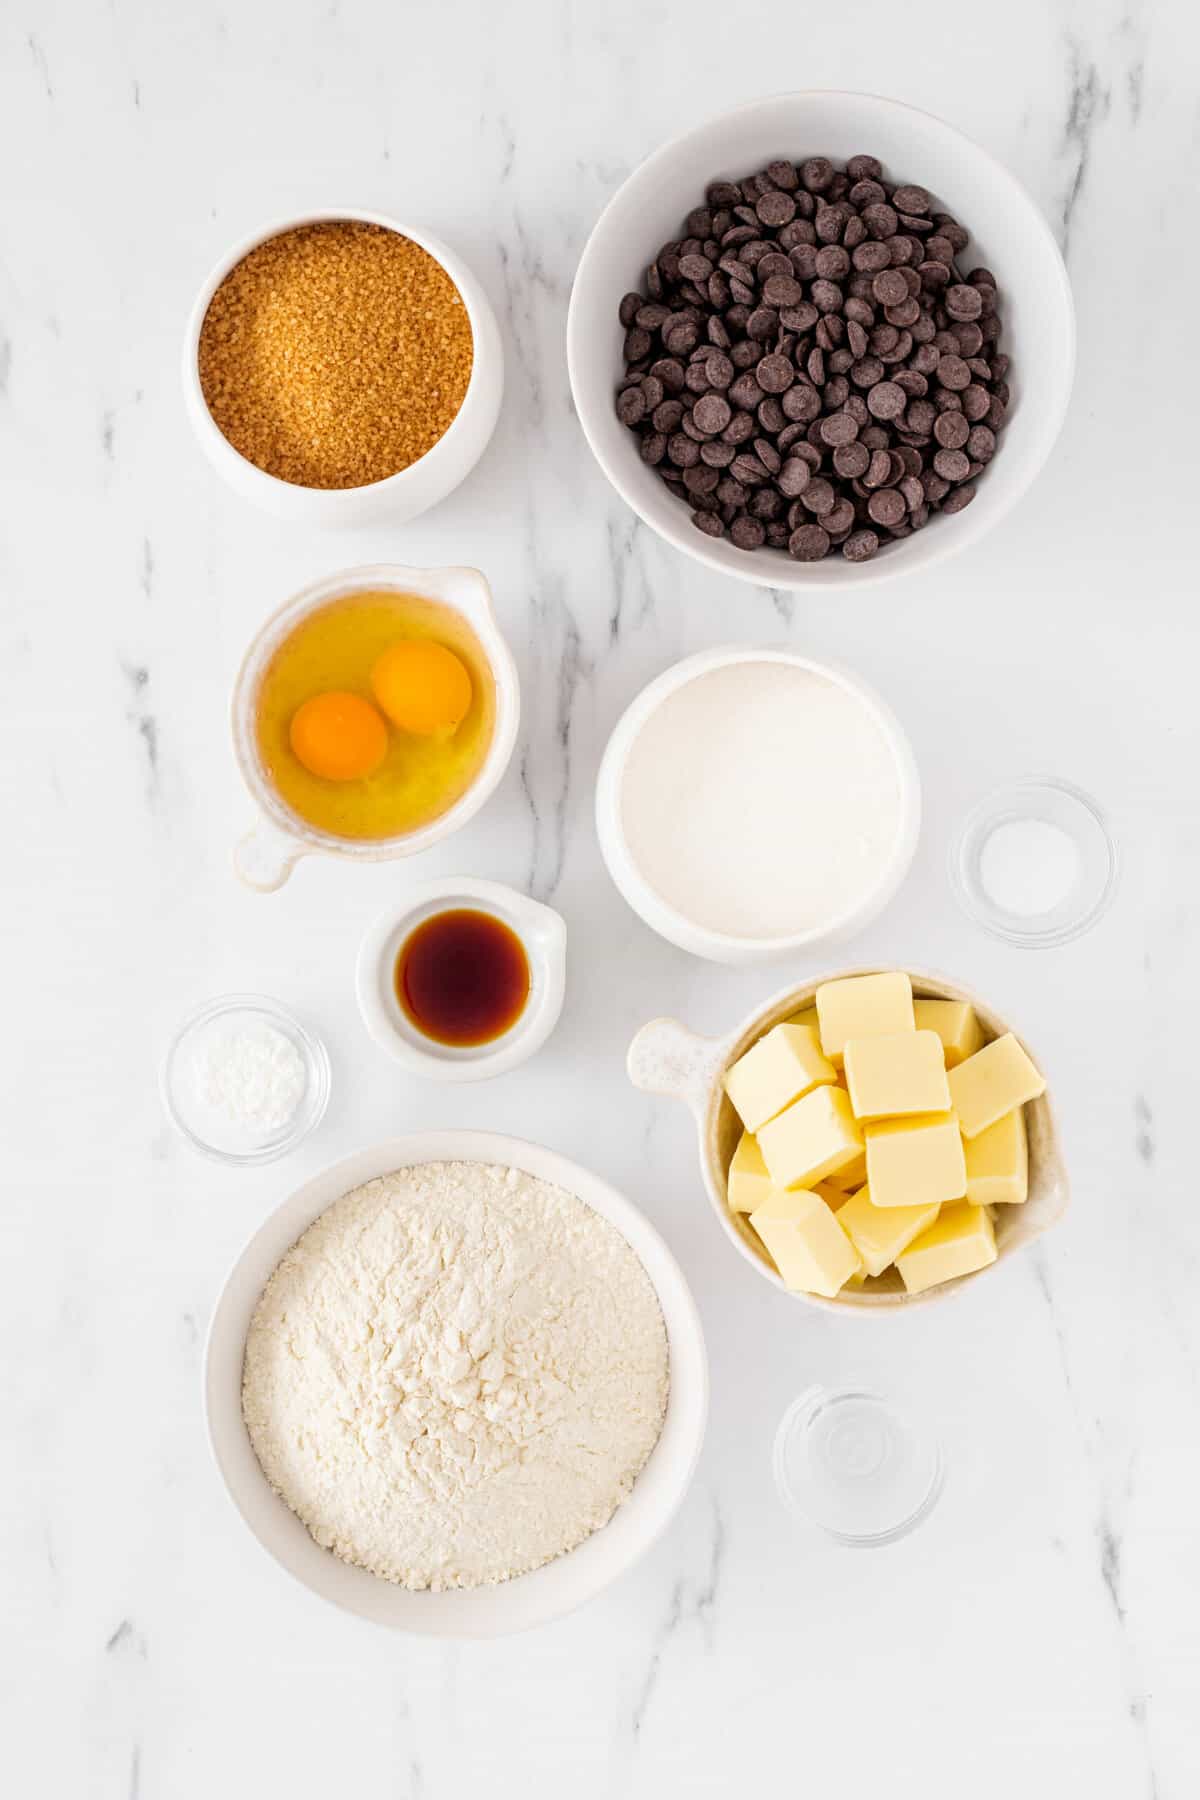 Overhead view of ingredients to make crispy and chewy chocolate chip cookies.